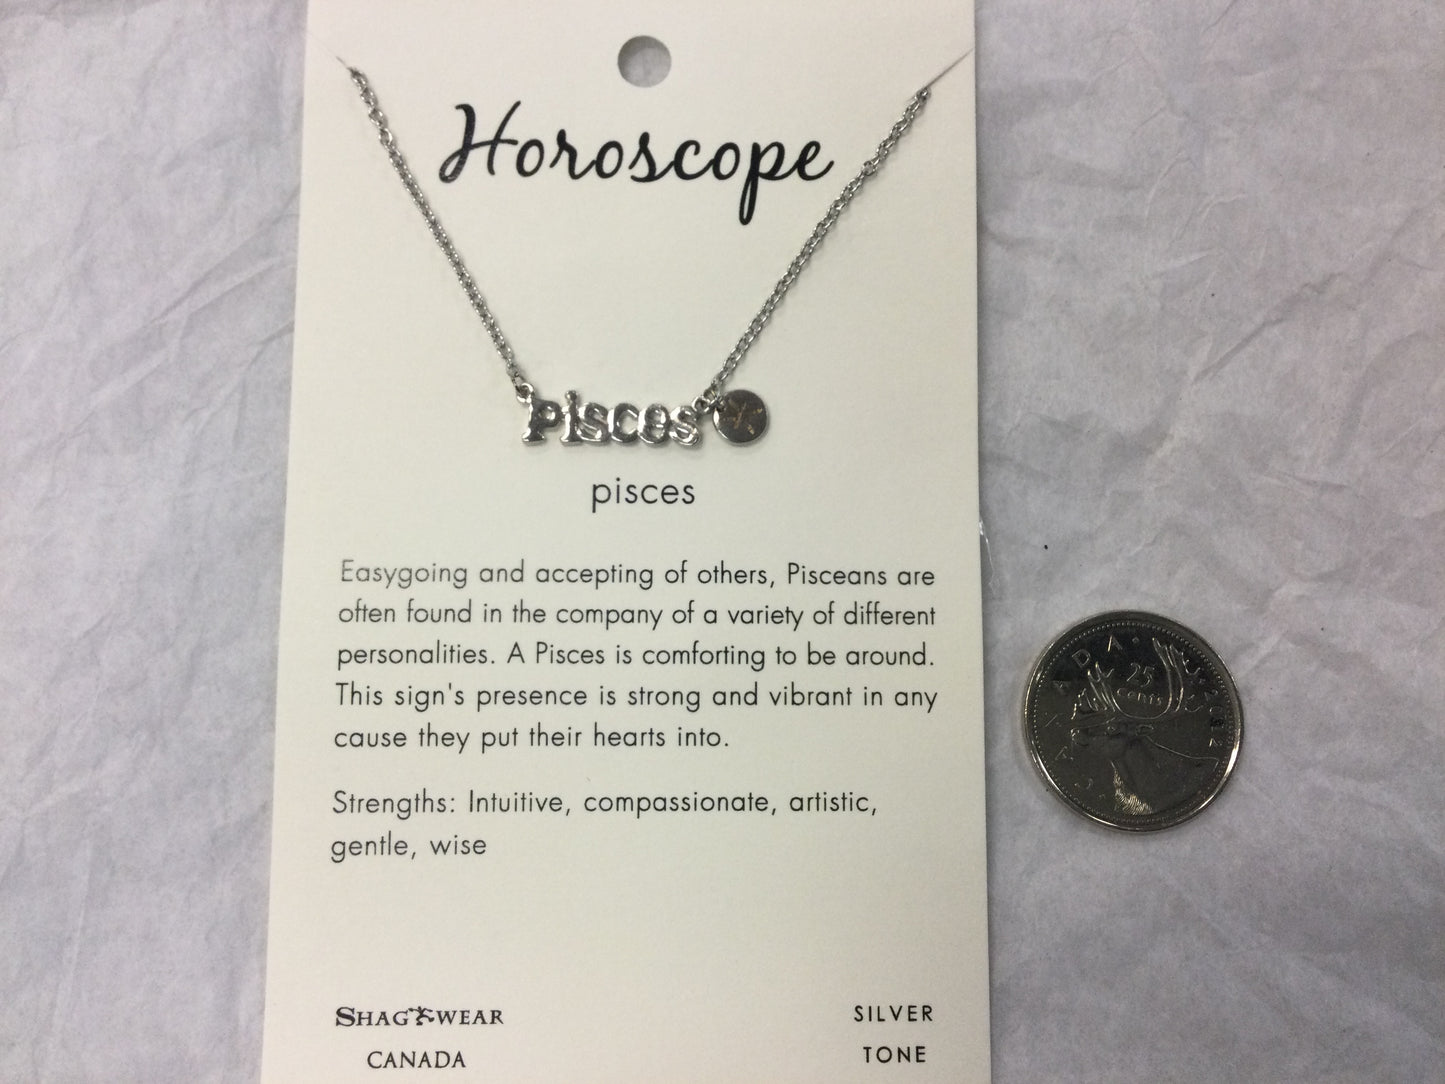 Silver Tone Horoscope Charm Necklaces